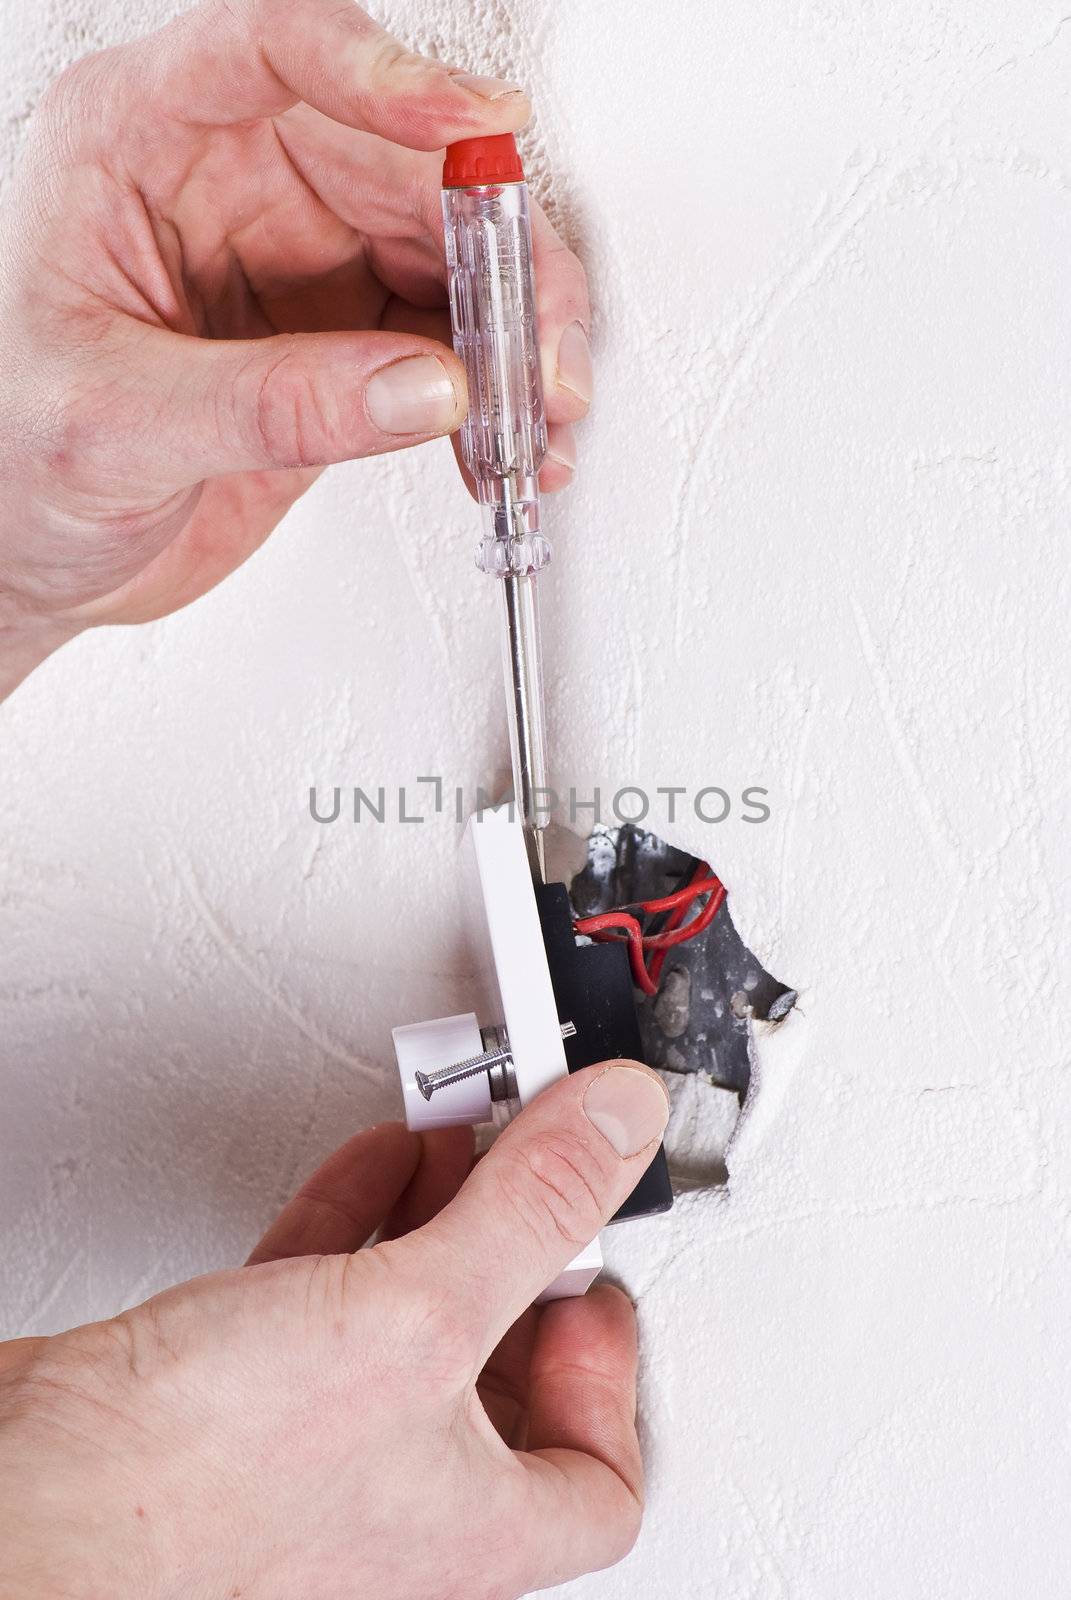 Hands of electrician fitting new light switch